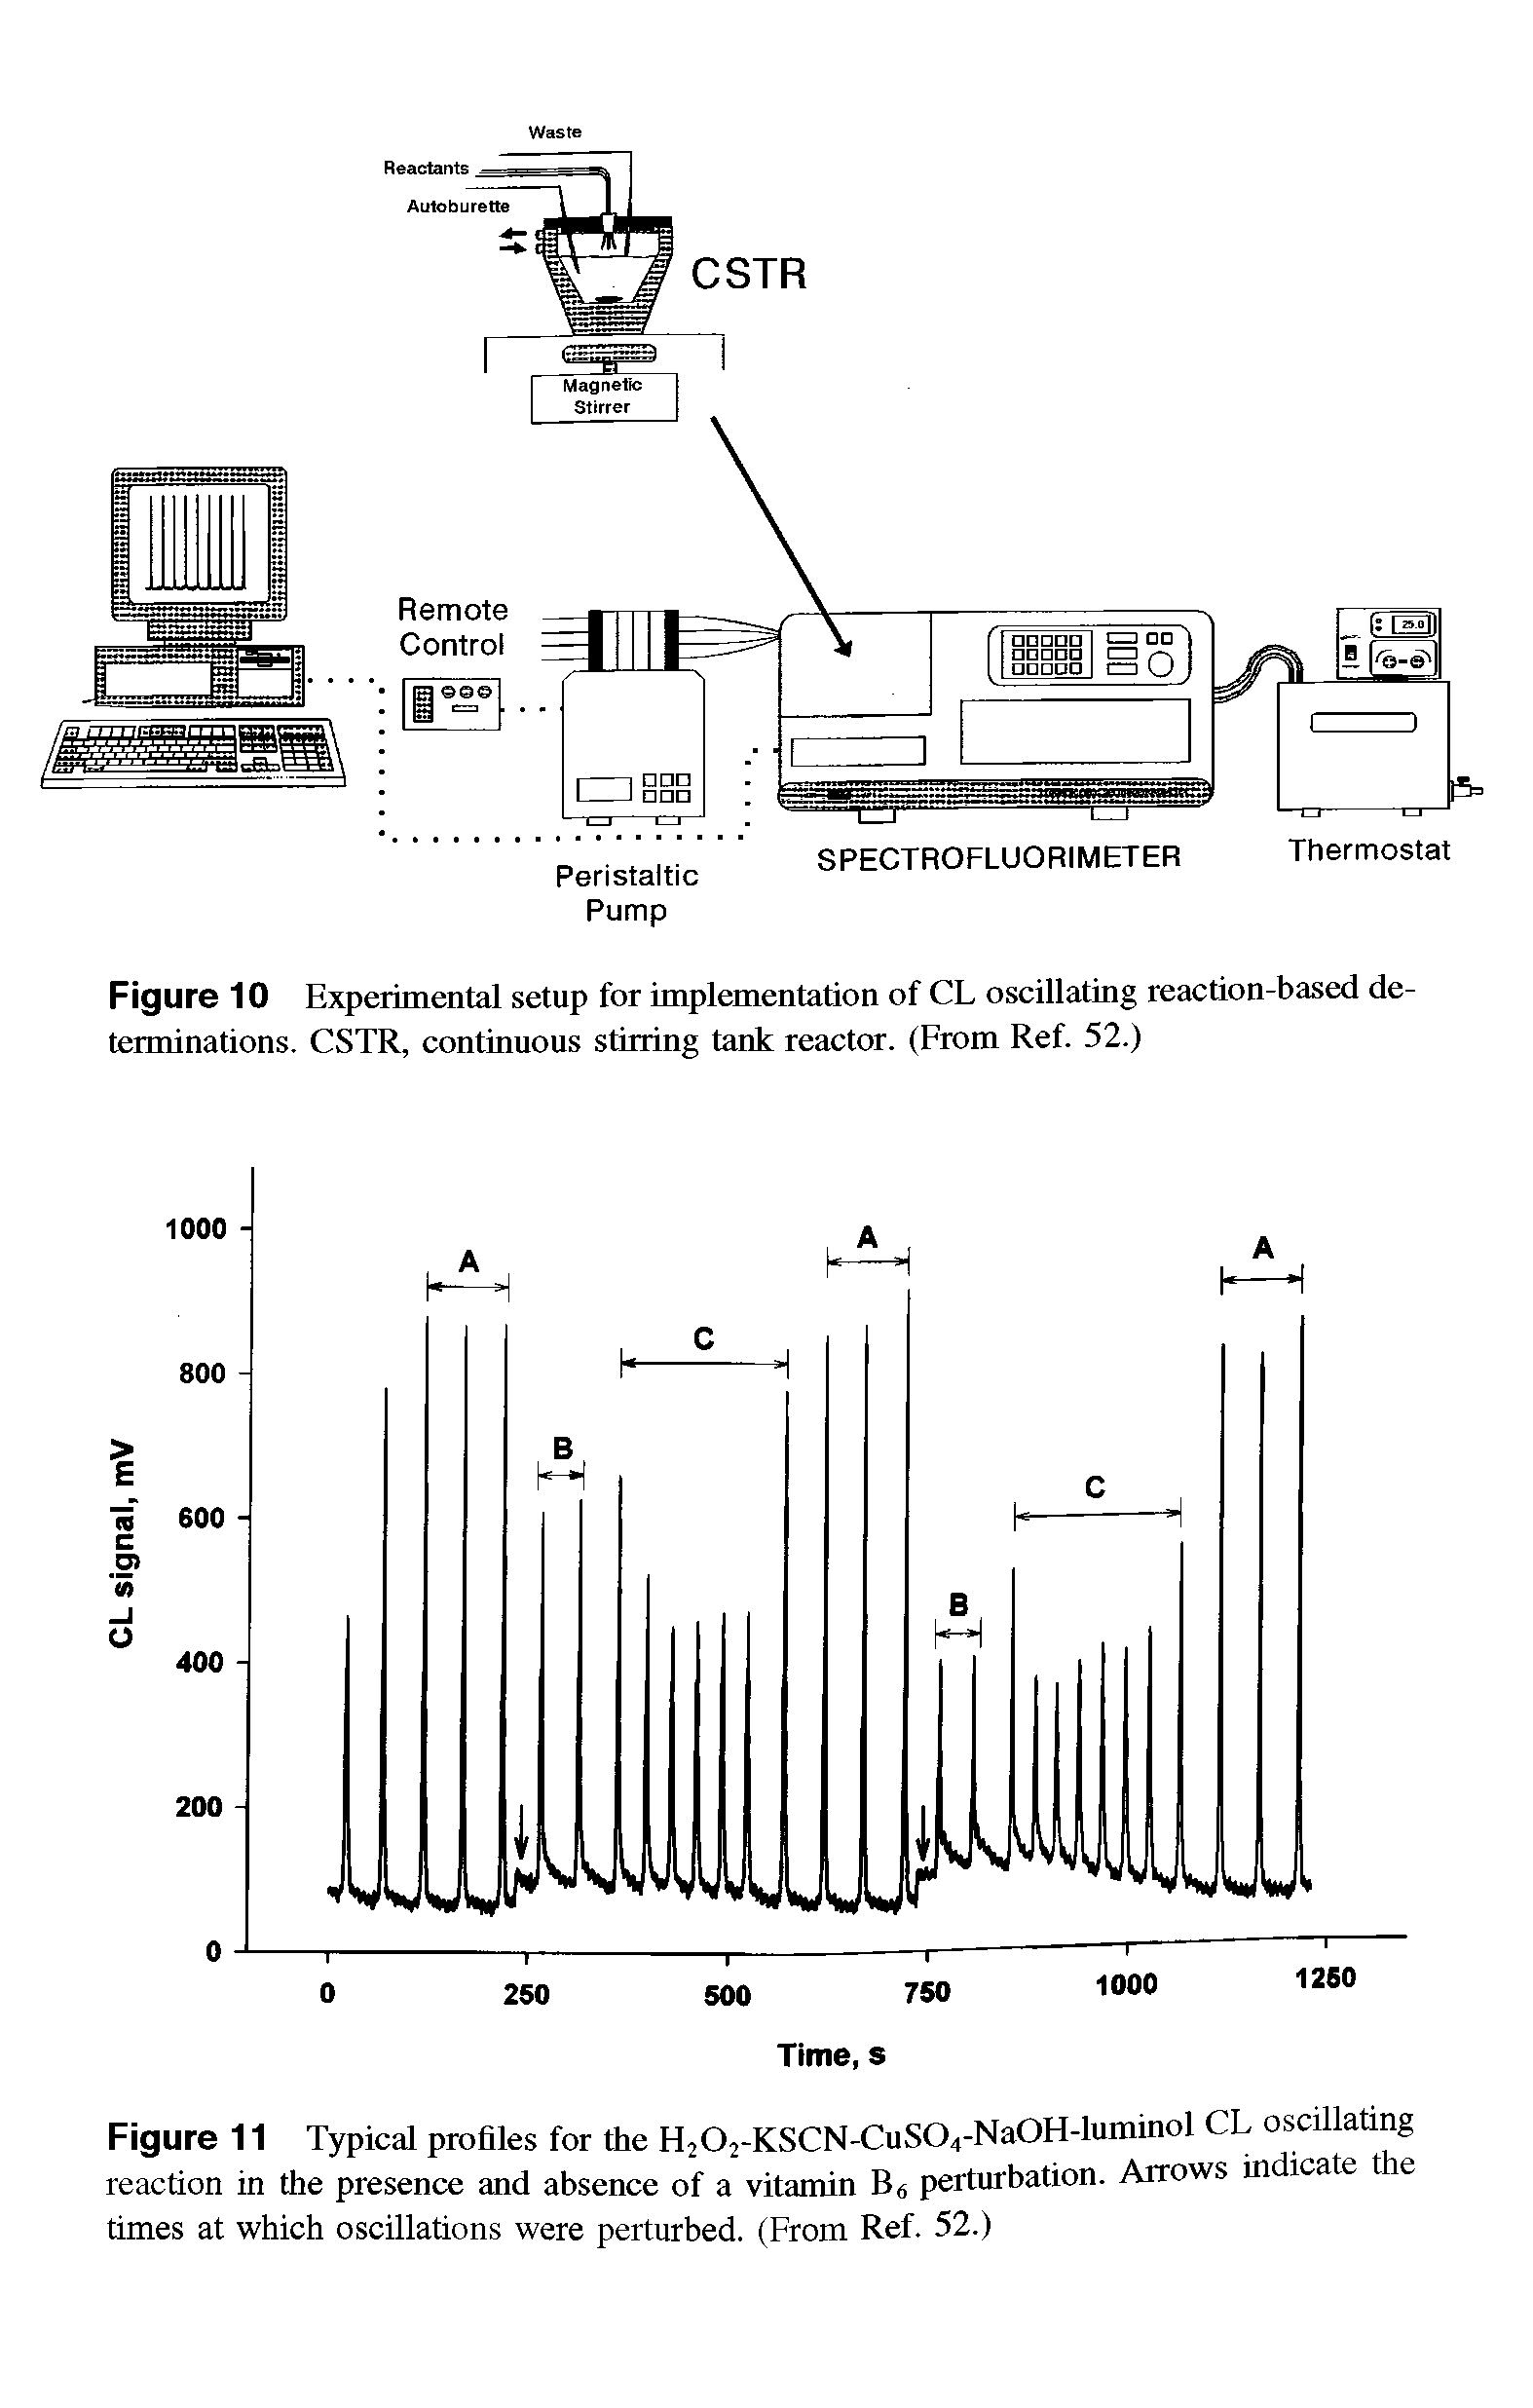 Figure 11 Typical profiles for the H202-KSCN-CuS04-NaOH-luminol reaction in the presence and absence of a vitamin B6 perturbation. Arrows in times at which oscillations were perturbed. (From Ref. 52.)...